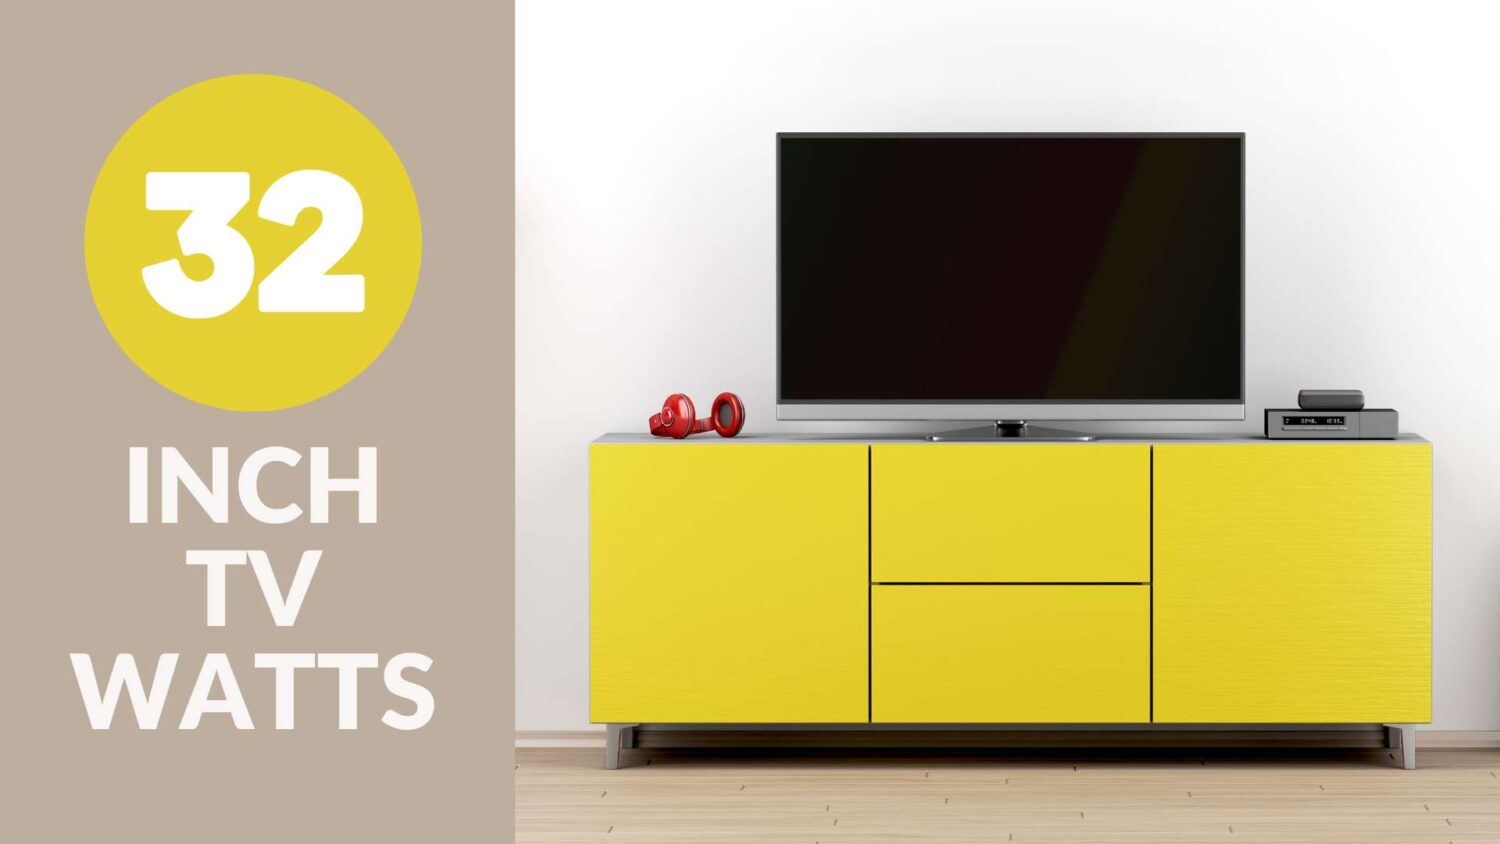 Image of a 32-inch tv mounted on wall over a yellow cabinet.